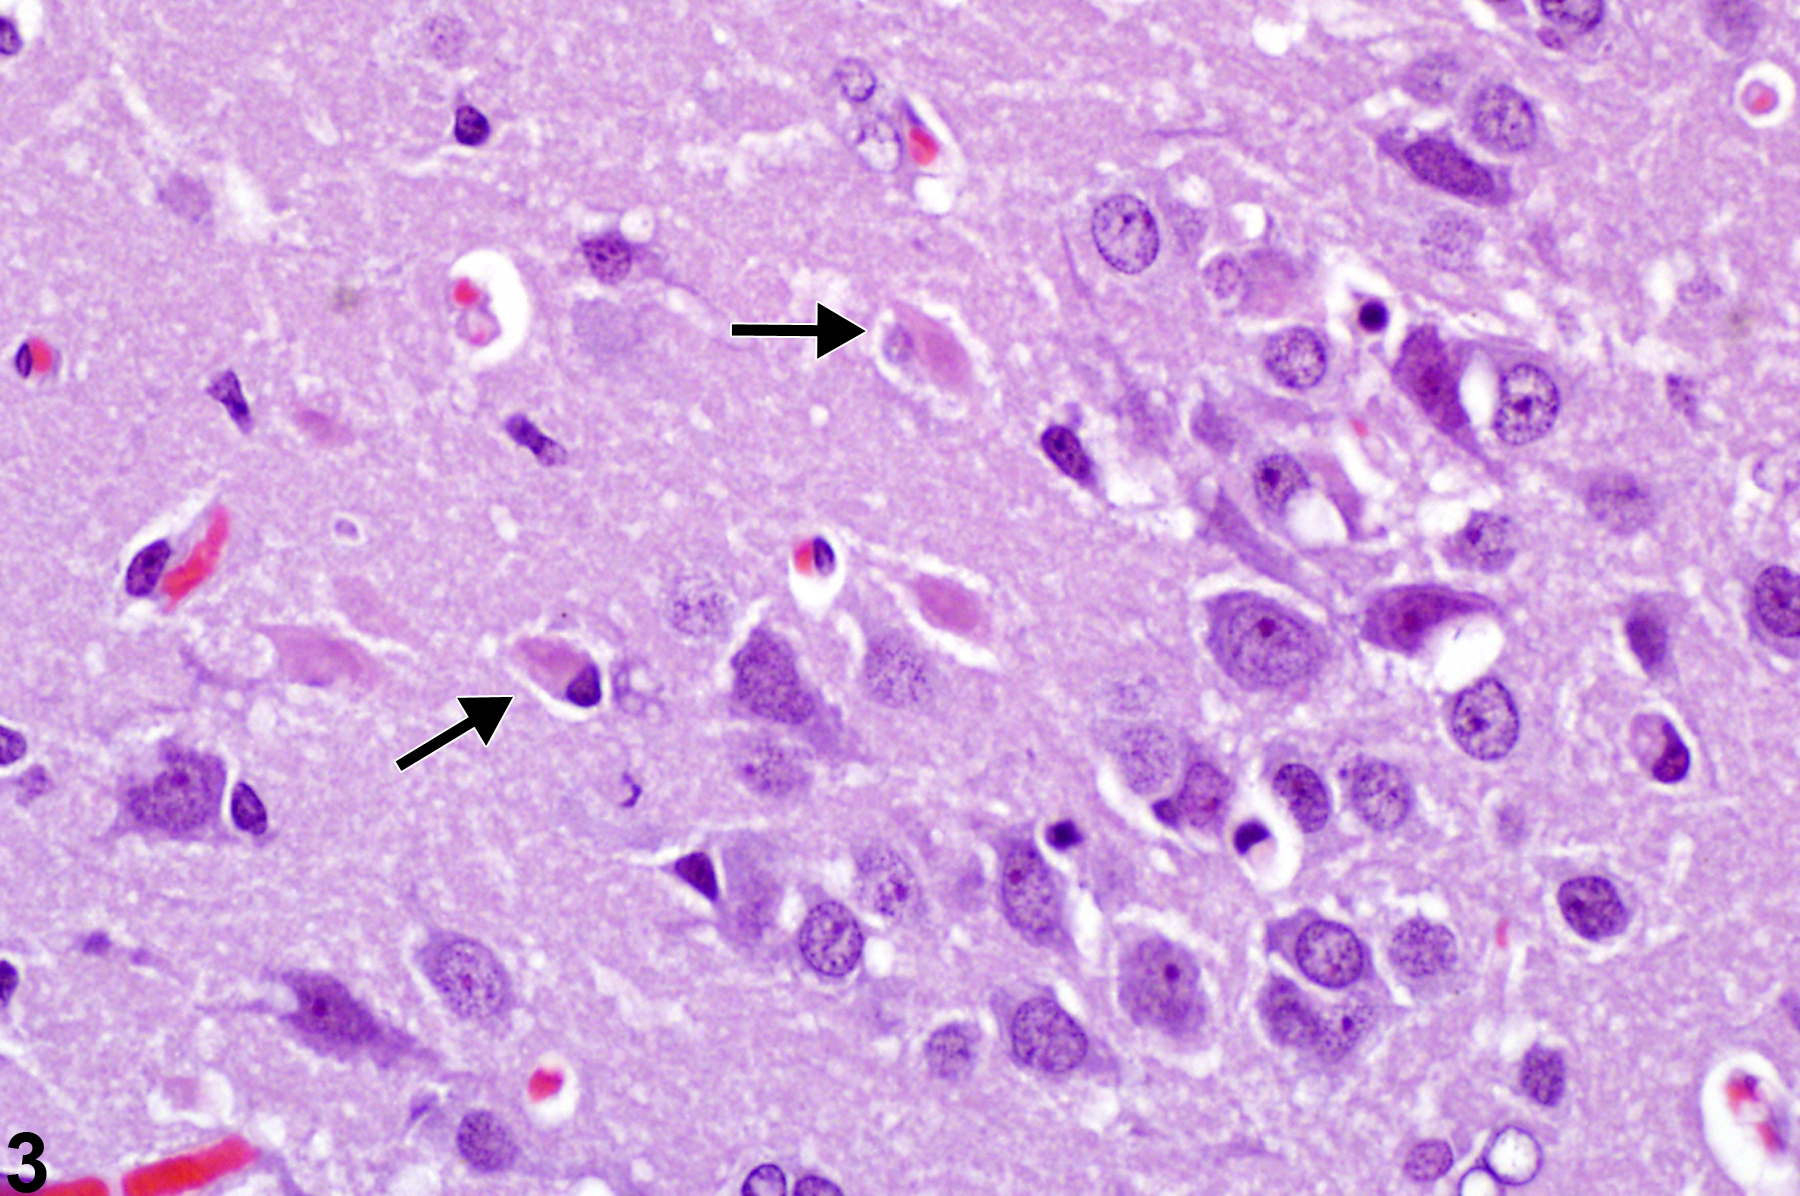 Image of necrosis in the brain from a male F344/N rat in a chronic study